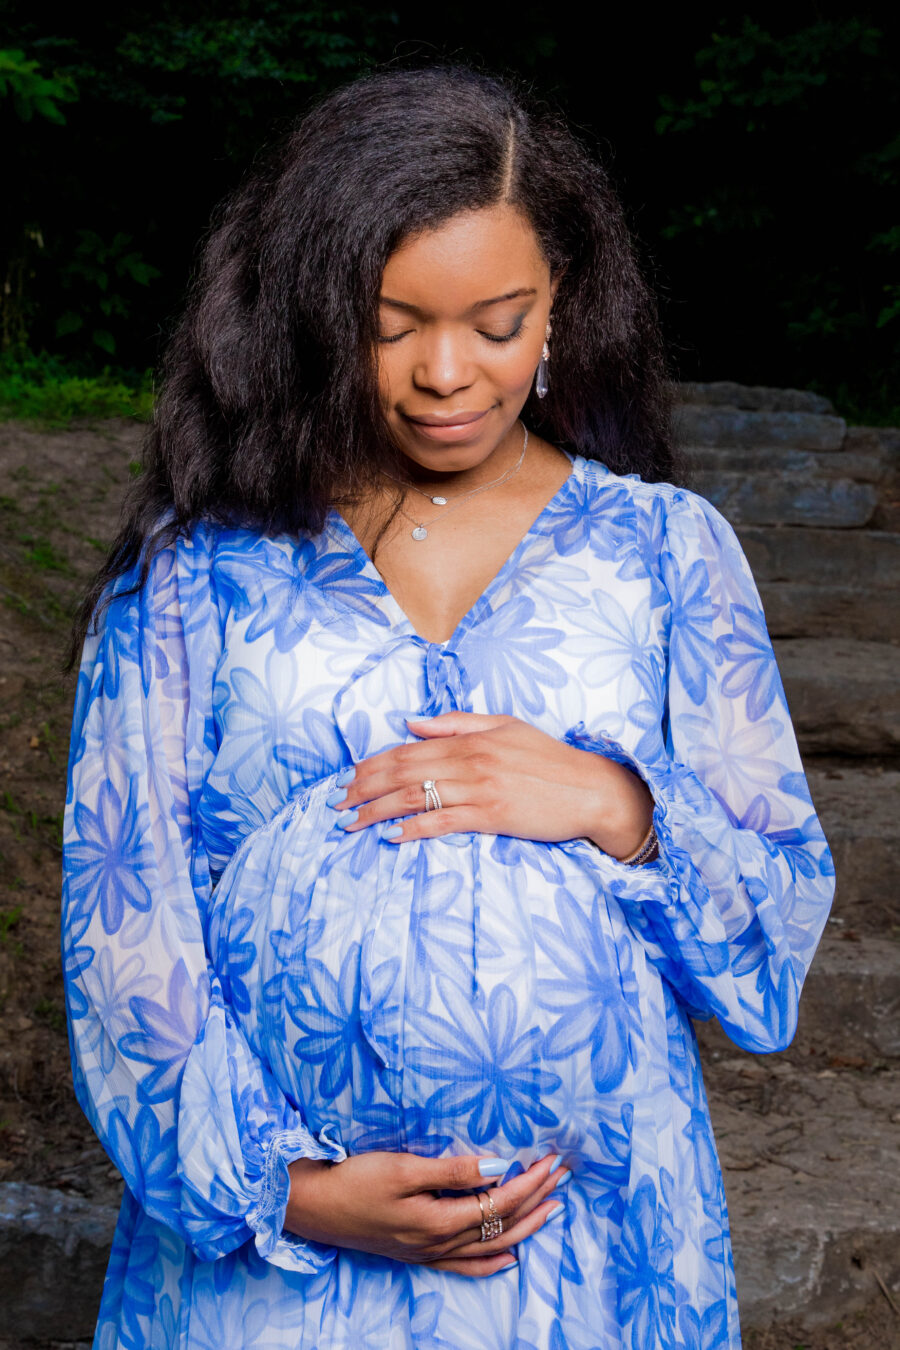 Blue ASOS maternity dress: Shelby Park Maternity Shoot by Jonathan's Photography featured on Nashville Bride Guide